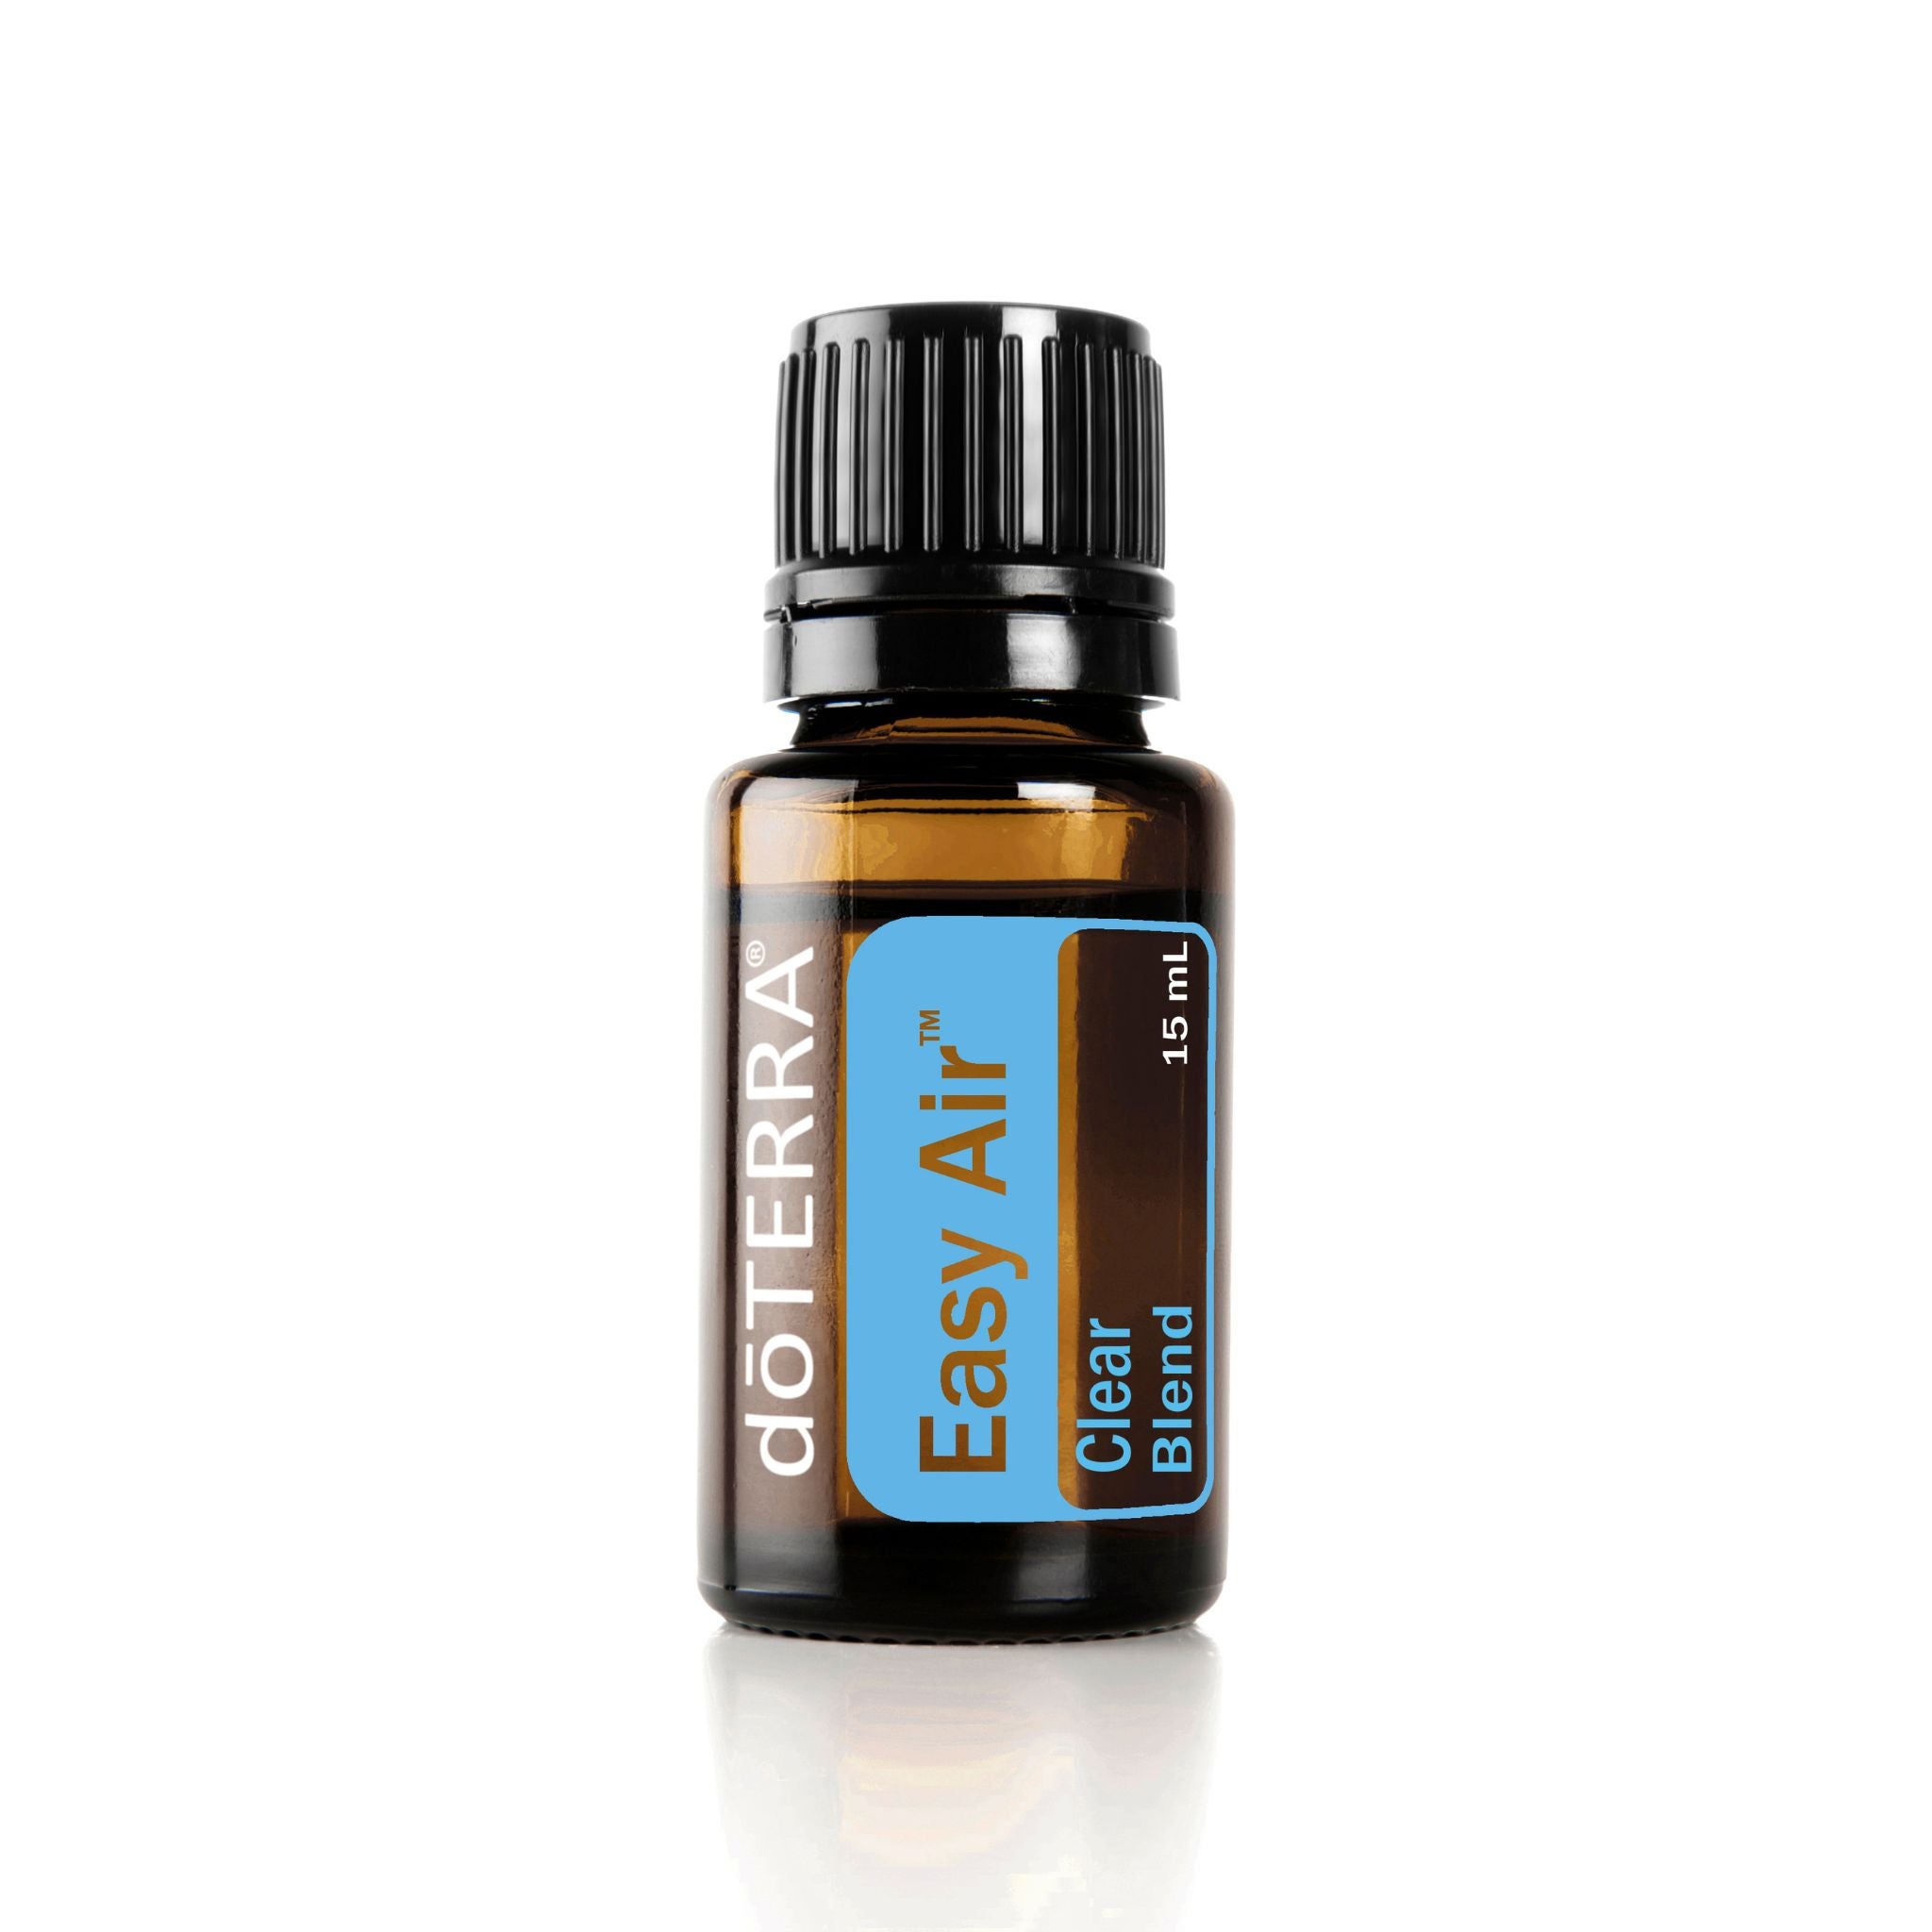 Easy Air essential oil has minty, fresh, calming aroma. Glass bottle, baby blue label, 15 ml